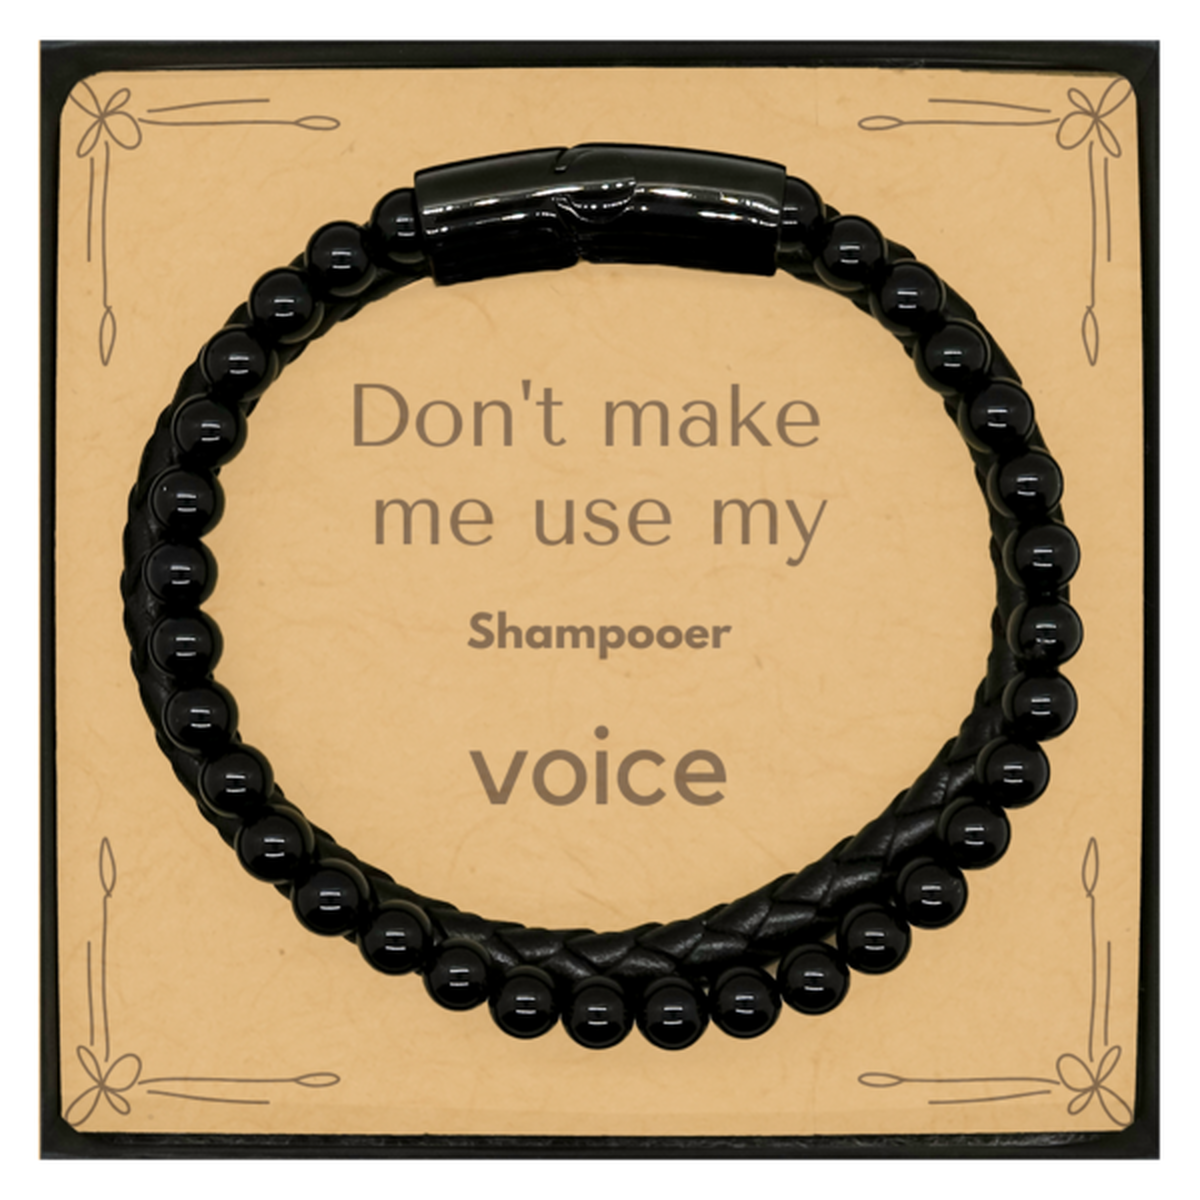 Don't make me use my Shampooer voice, Sarcasm Shampooer Card Gifts, Christmas Shampooer Stone Leather Bracelets Birthday Unique Gifts For Shampooer Coworkers, Men, Women, Colleague, Friends